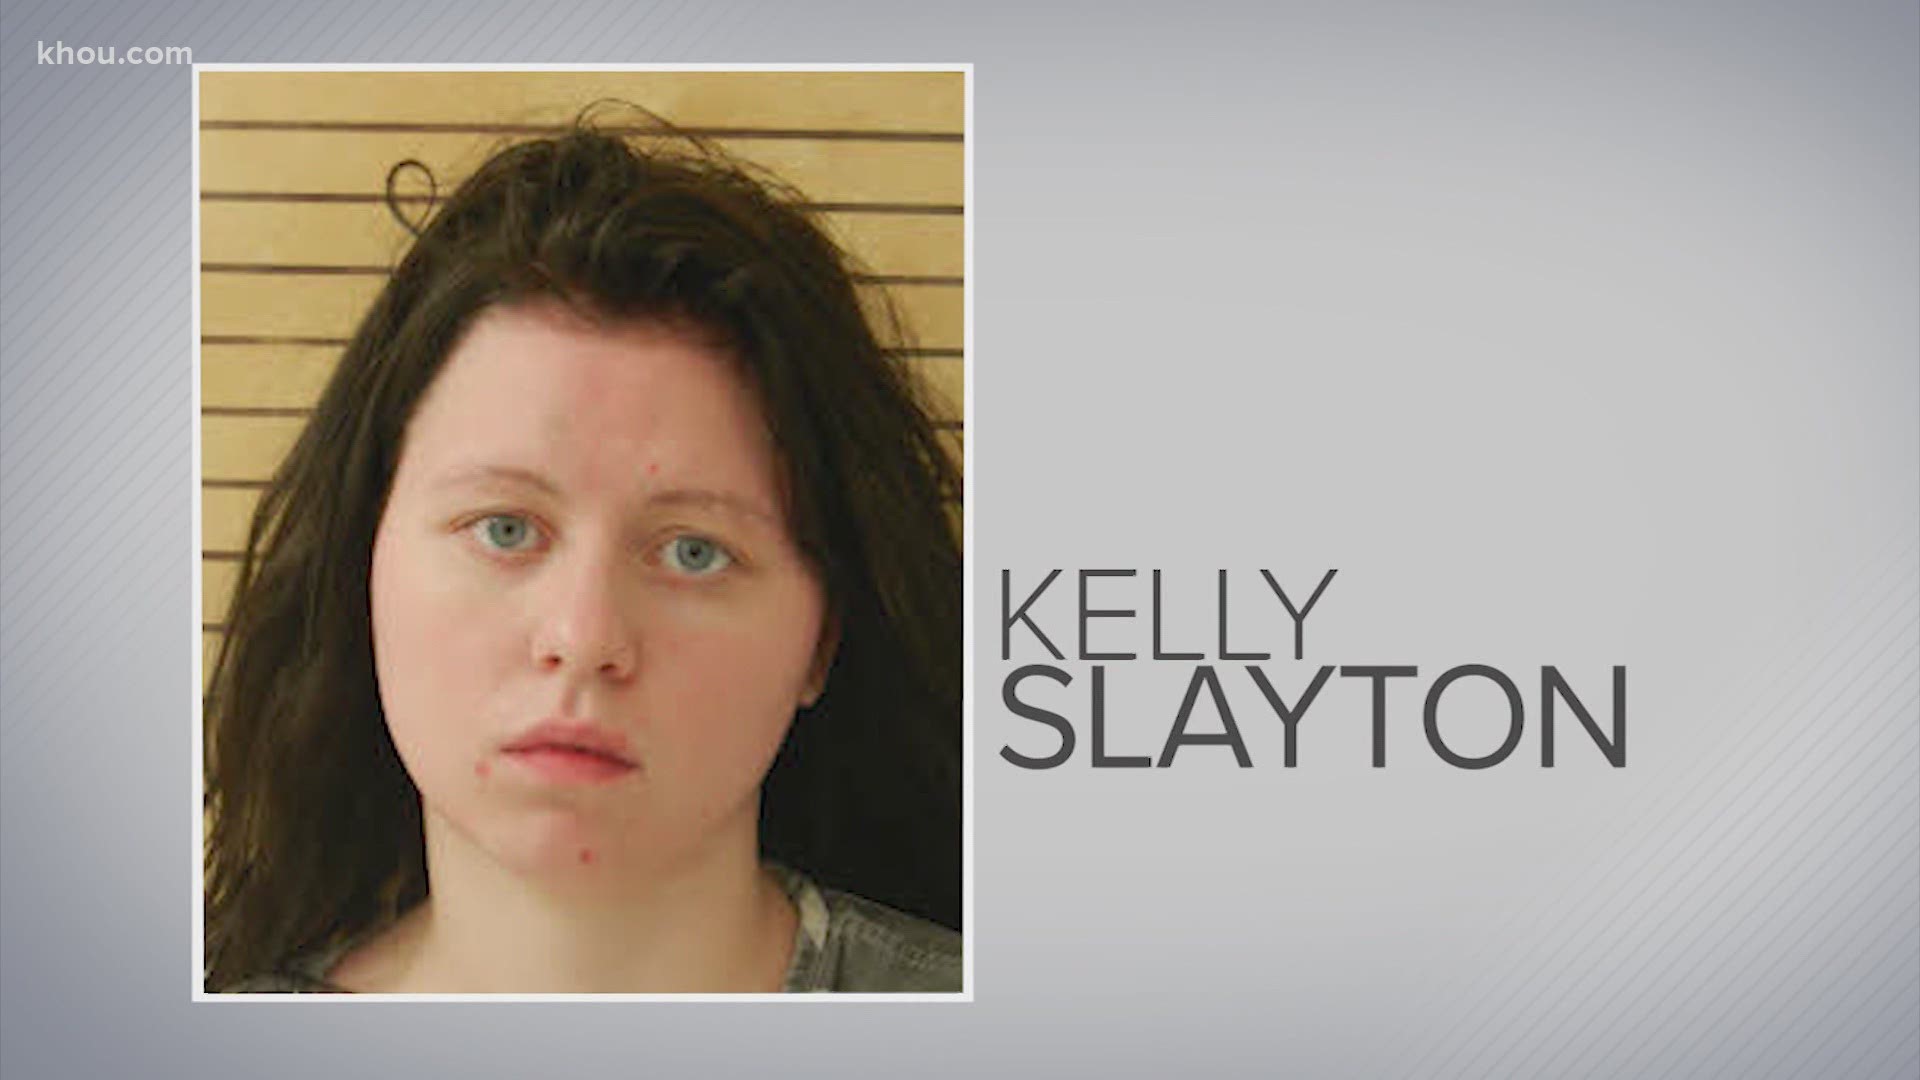 Kelly Slayton has been charged in the death of a 30-year-old man who was last heard from by family and friends on Dec. 19, court documents revealed.